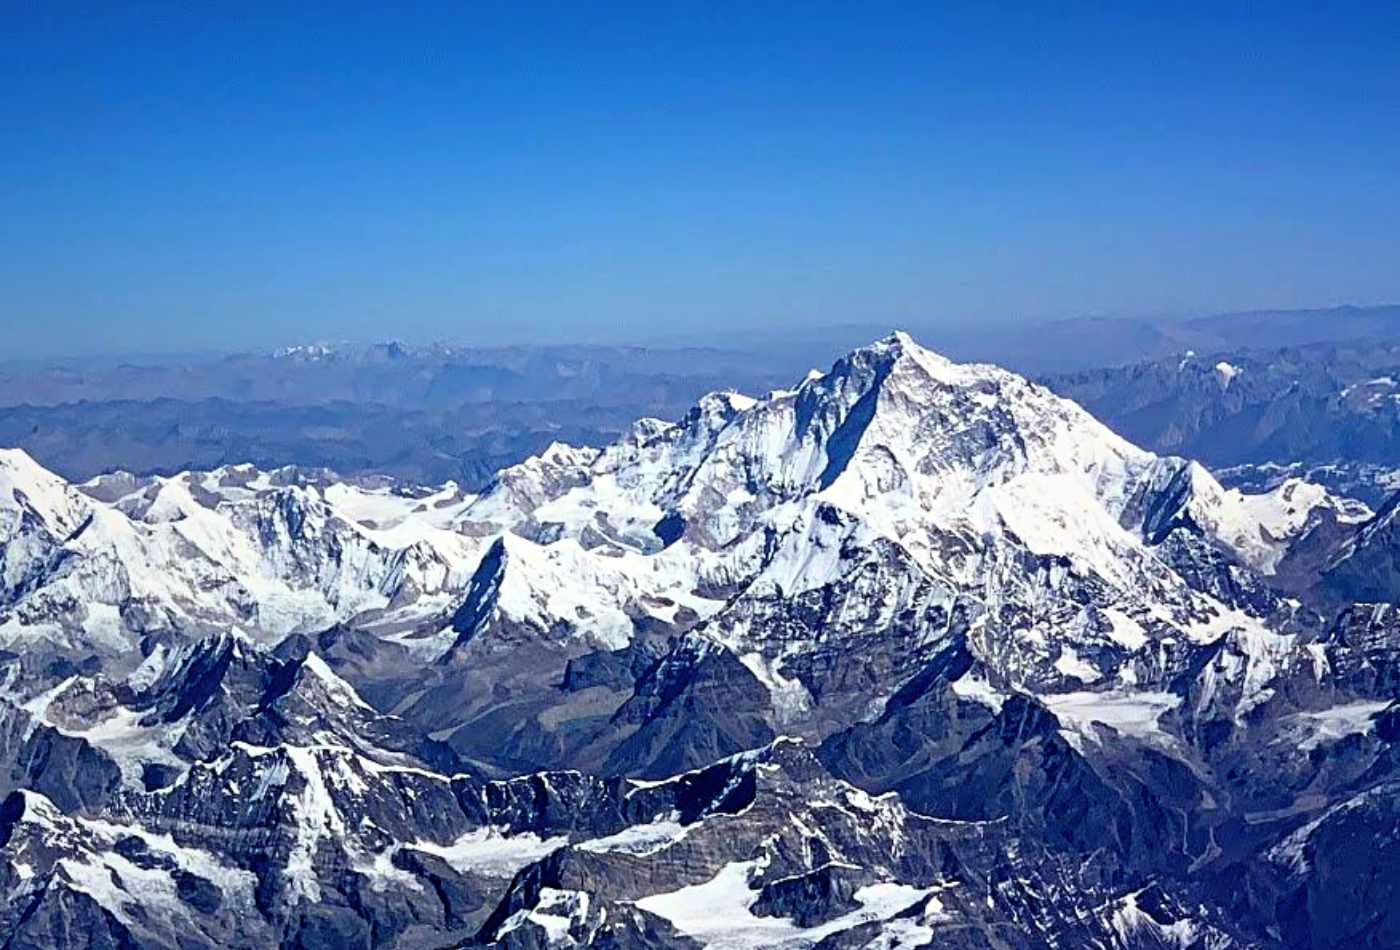 View of majestic Himalayan peaks including Mt. Everest, as seen from a plane while flying to Bhutan.